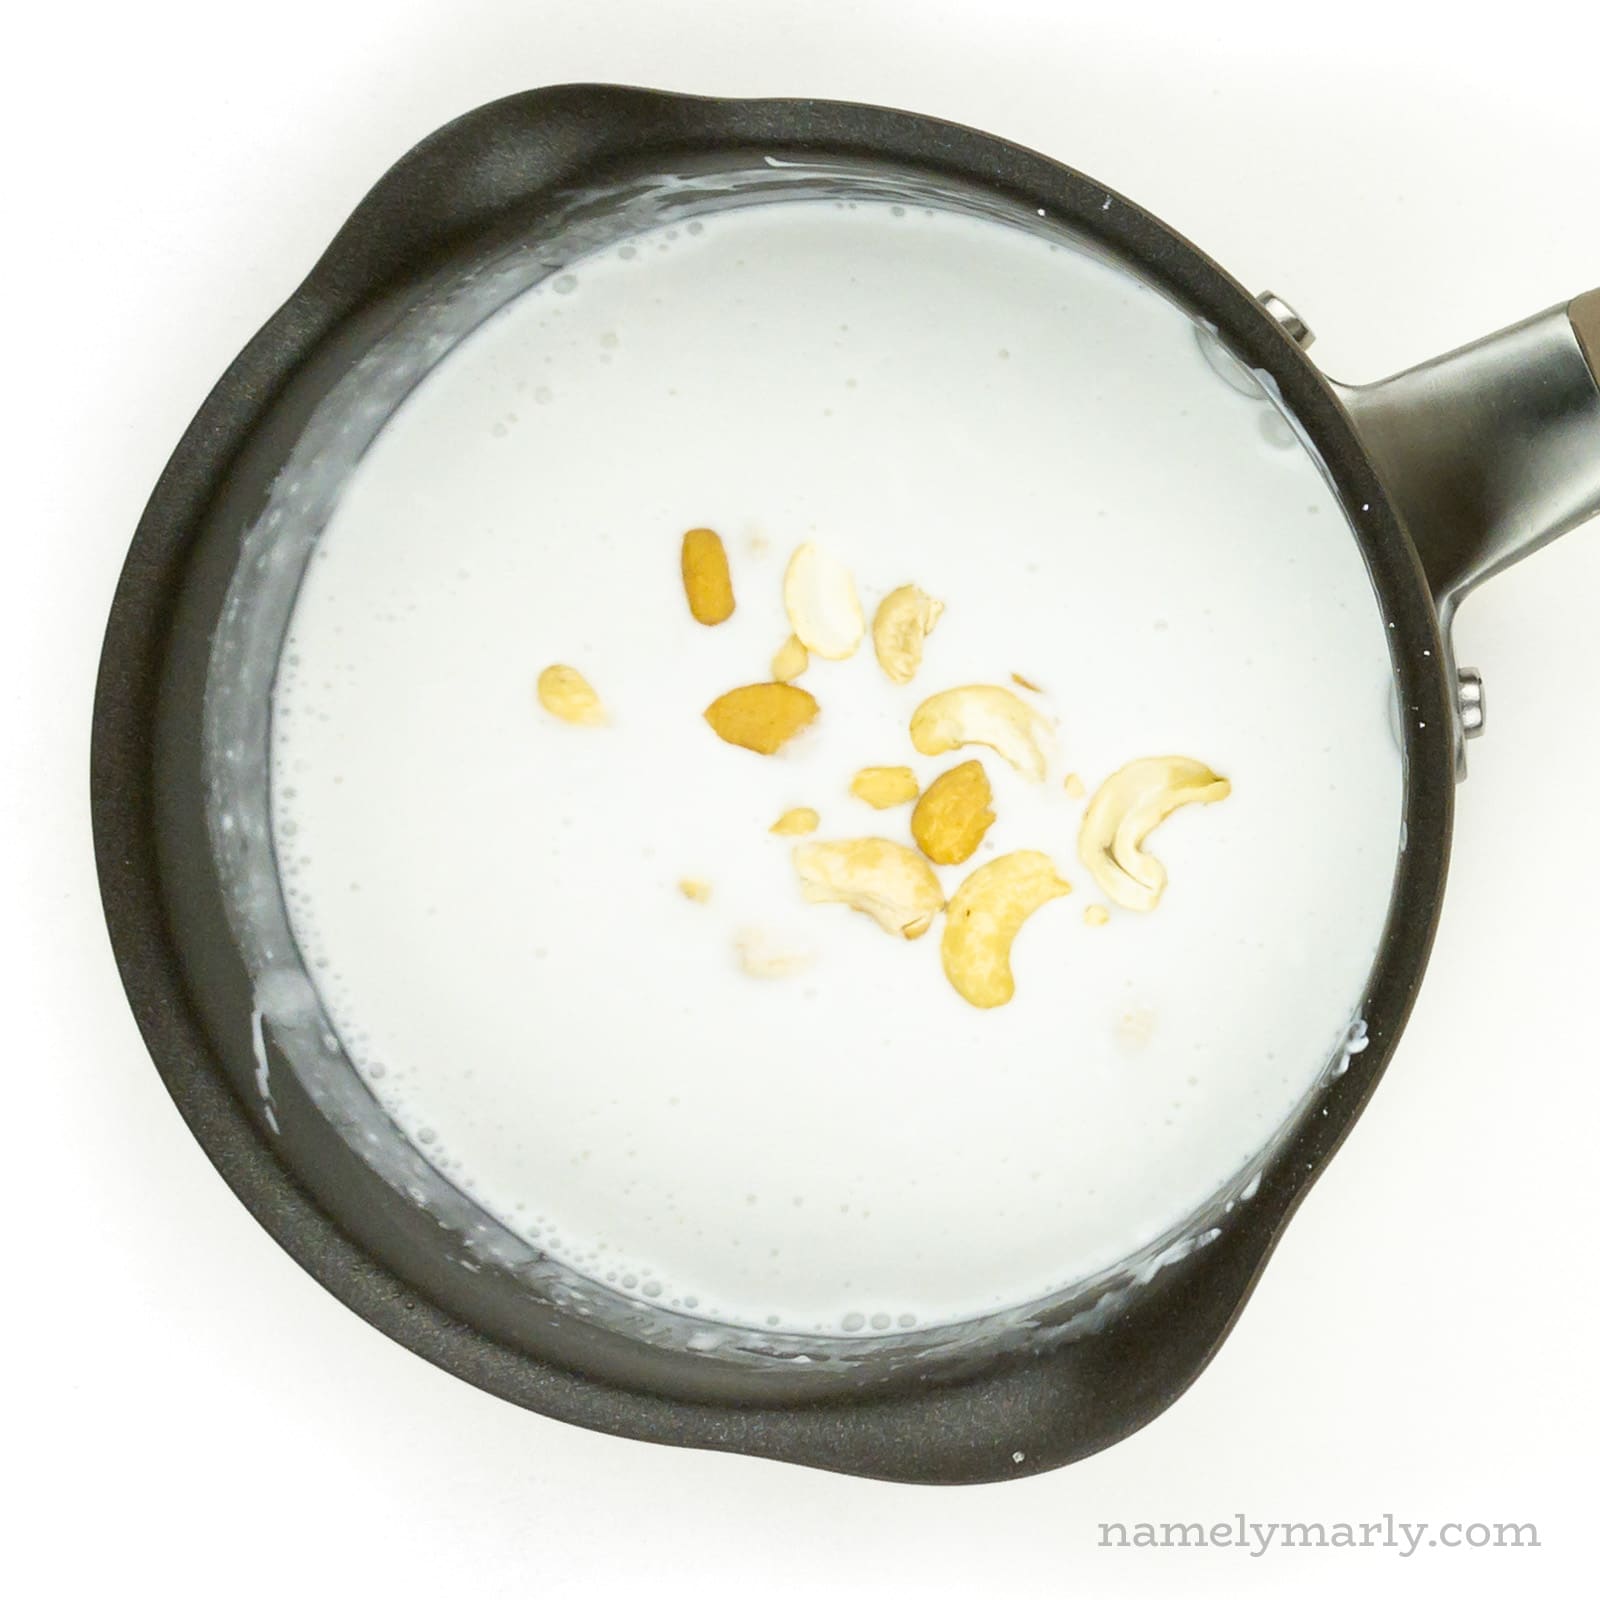 A saucepan holds coconut milk with cashews.